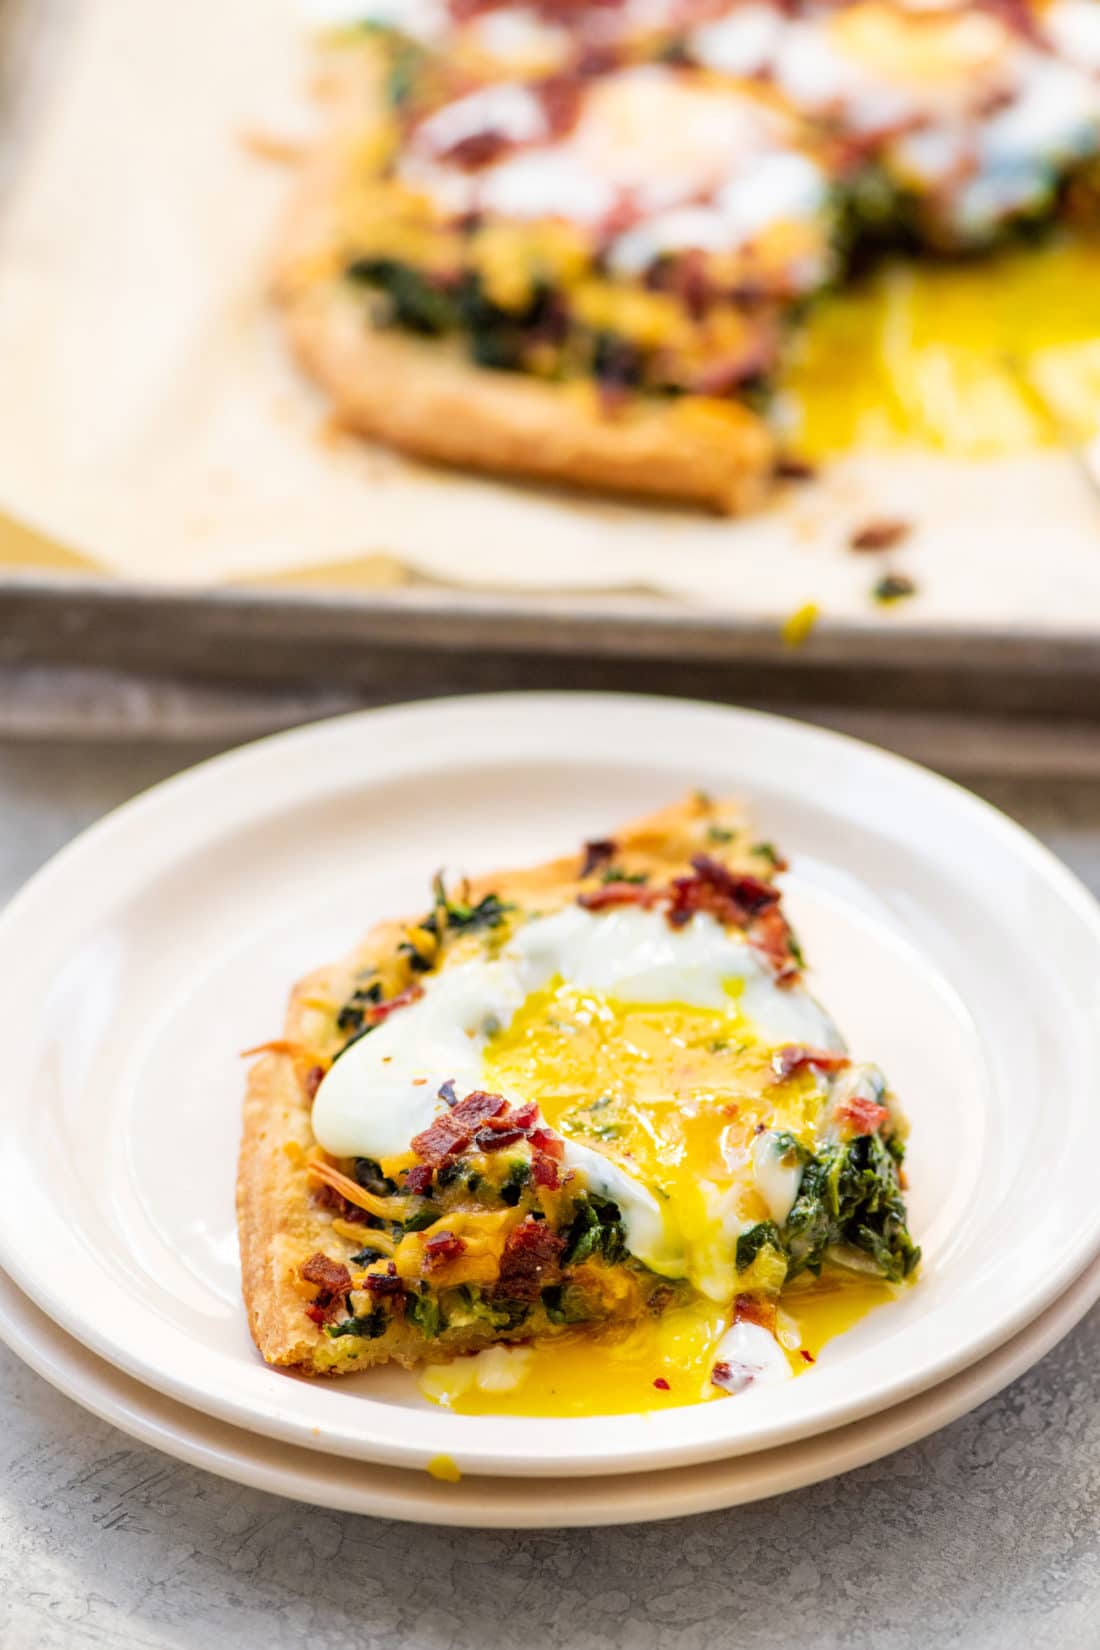 Puff Pastry Breakfast Tarts with Spinach, Egg and Cheese / Photo by Cheyenne Cohen / Katie Workman / themom100.com